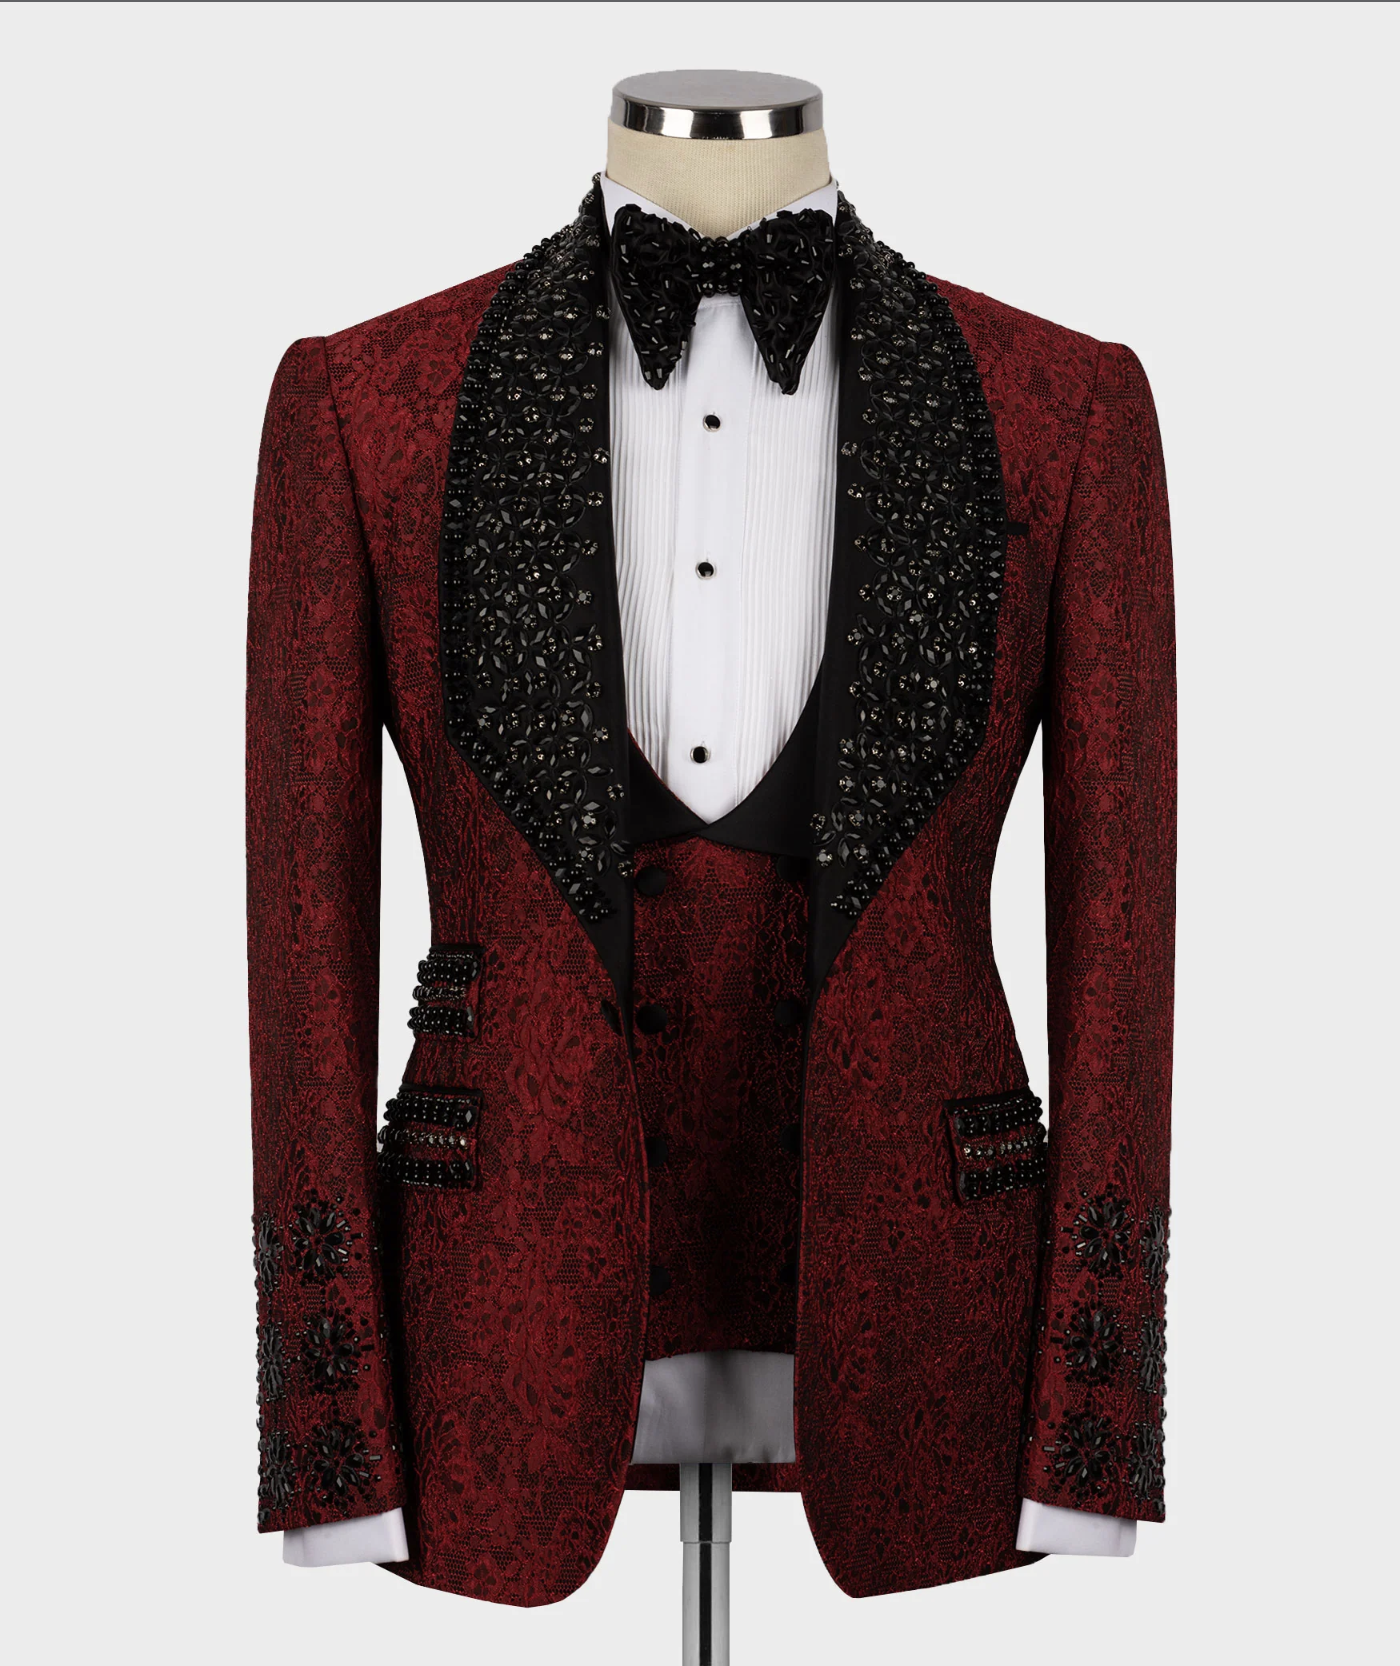 Red Formal Bandhgala Suit For Groom With Latest Coat Pant Designs For  Weddings And Evening Events Tuxedo With Stand Collar Style 274Q From Ouri,  $75.68 | DHgate.Com